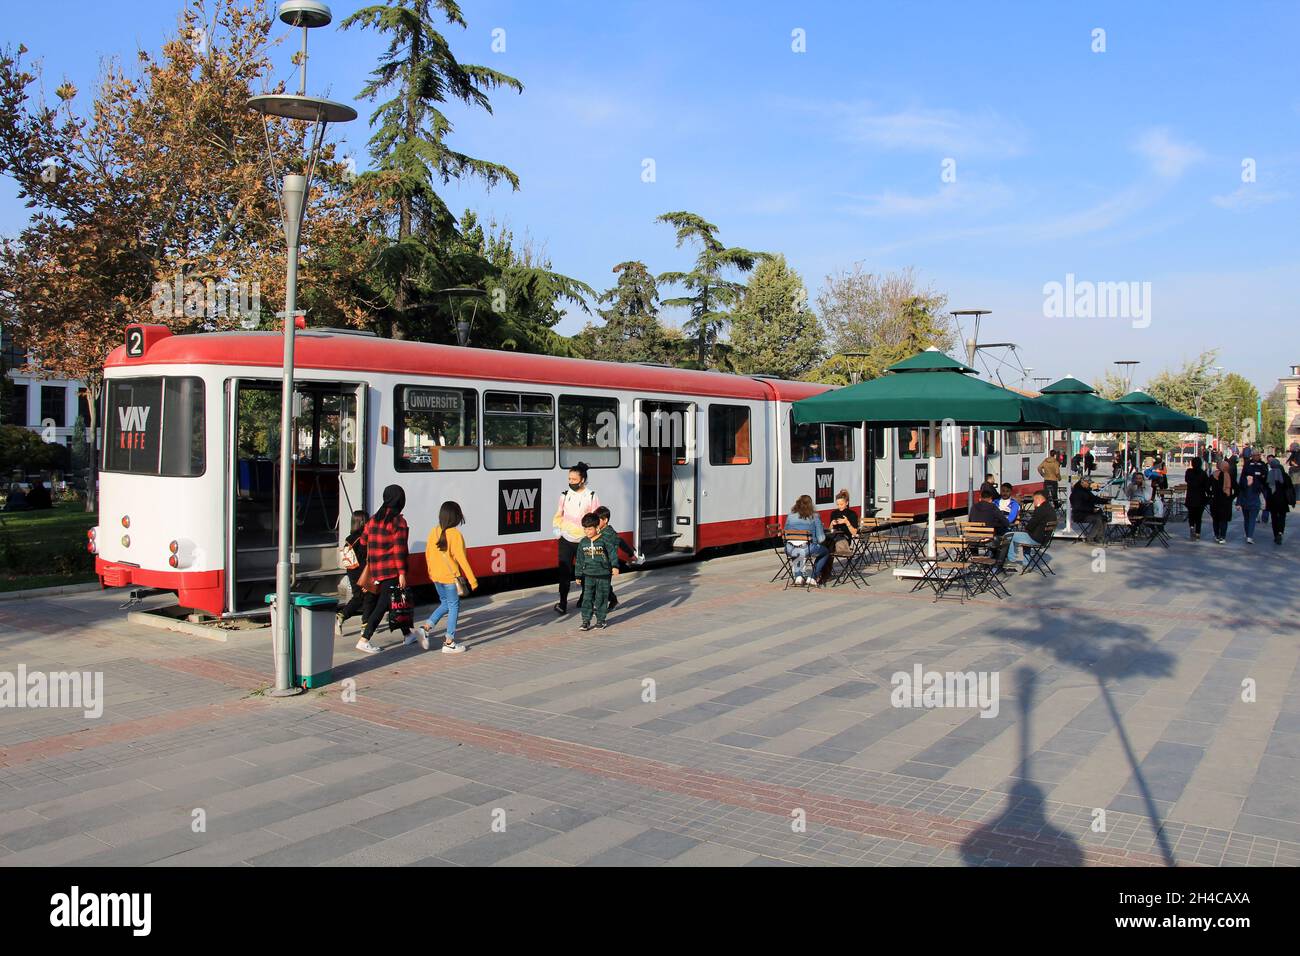 Tramway Cafeteria is located in Kulturpark. The unused tram was arranged as a cafeteria. Stock Photo